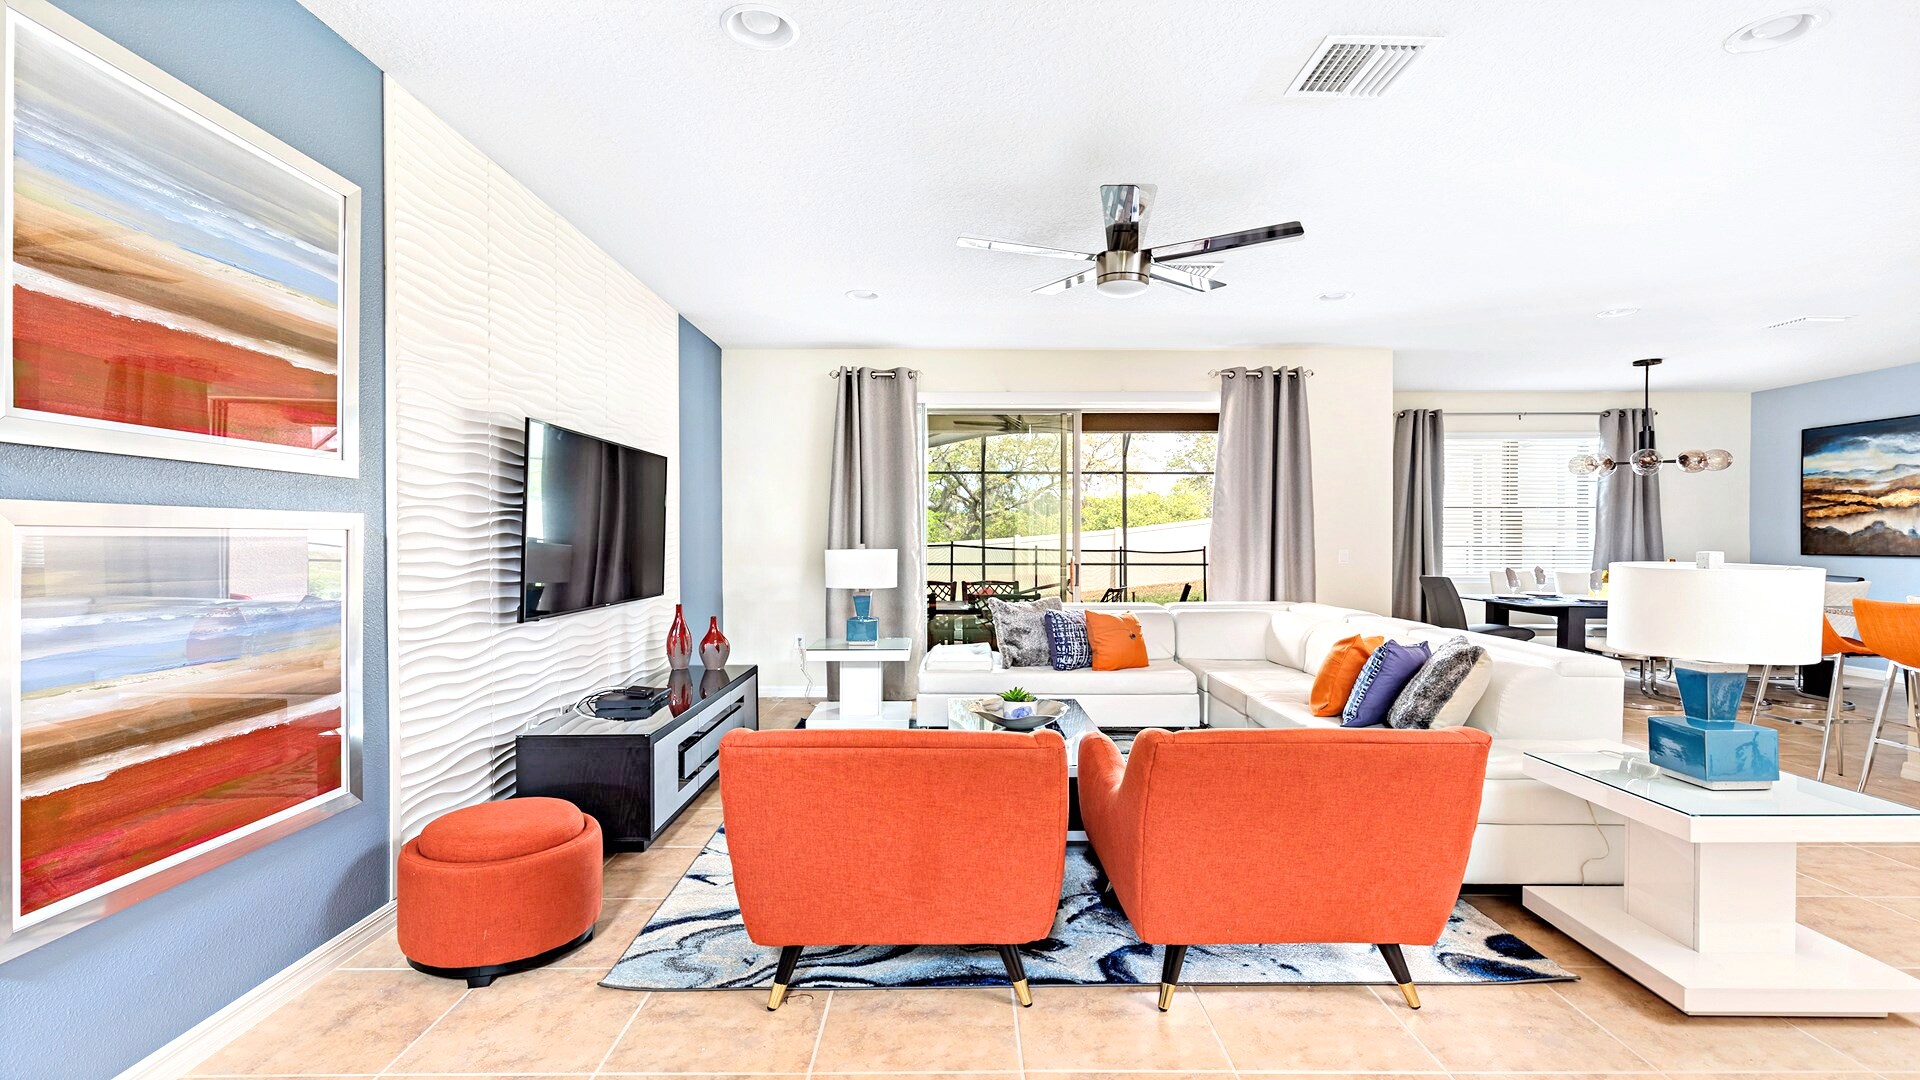 Living Room: Spacious and inviting, the area features a cozy sofa, ideal for family reunions and creating lasting memories